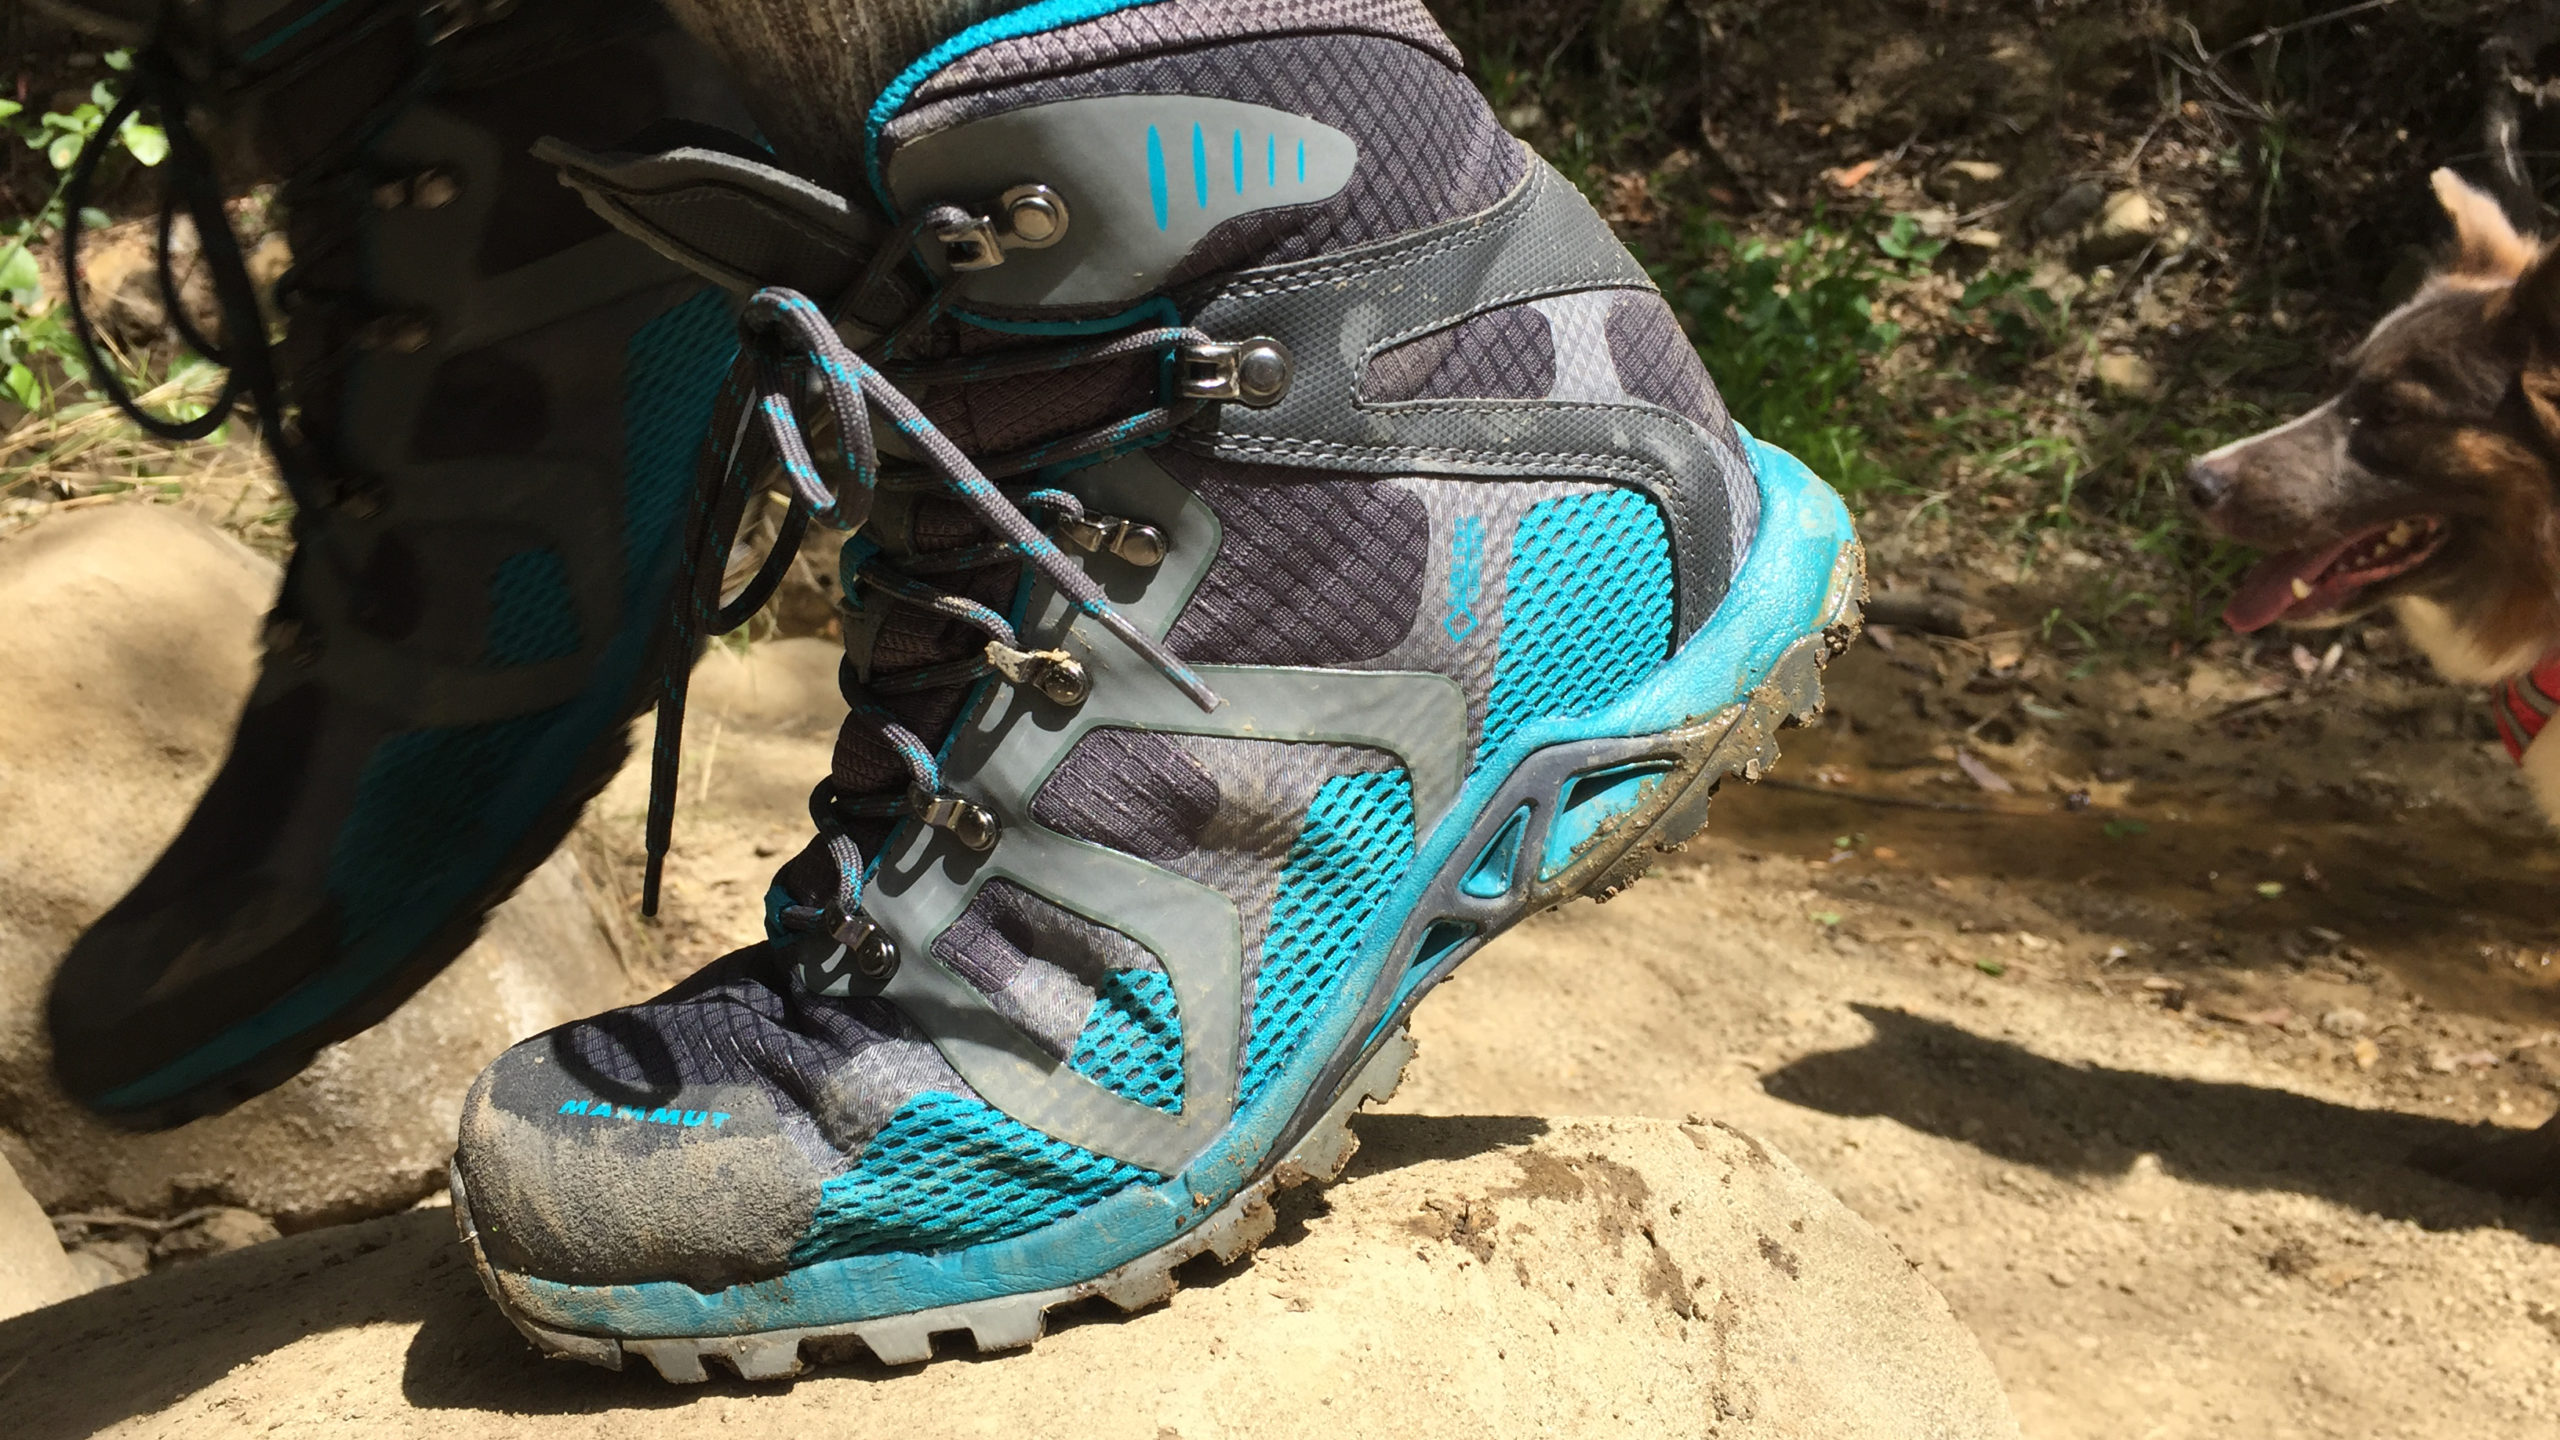 The Best All-Purpose Hiking Boots For Women